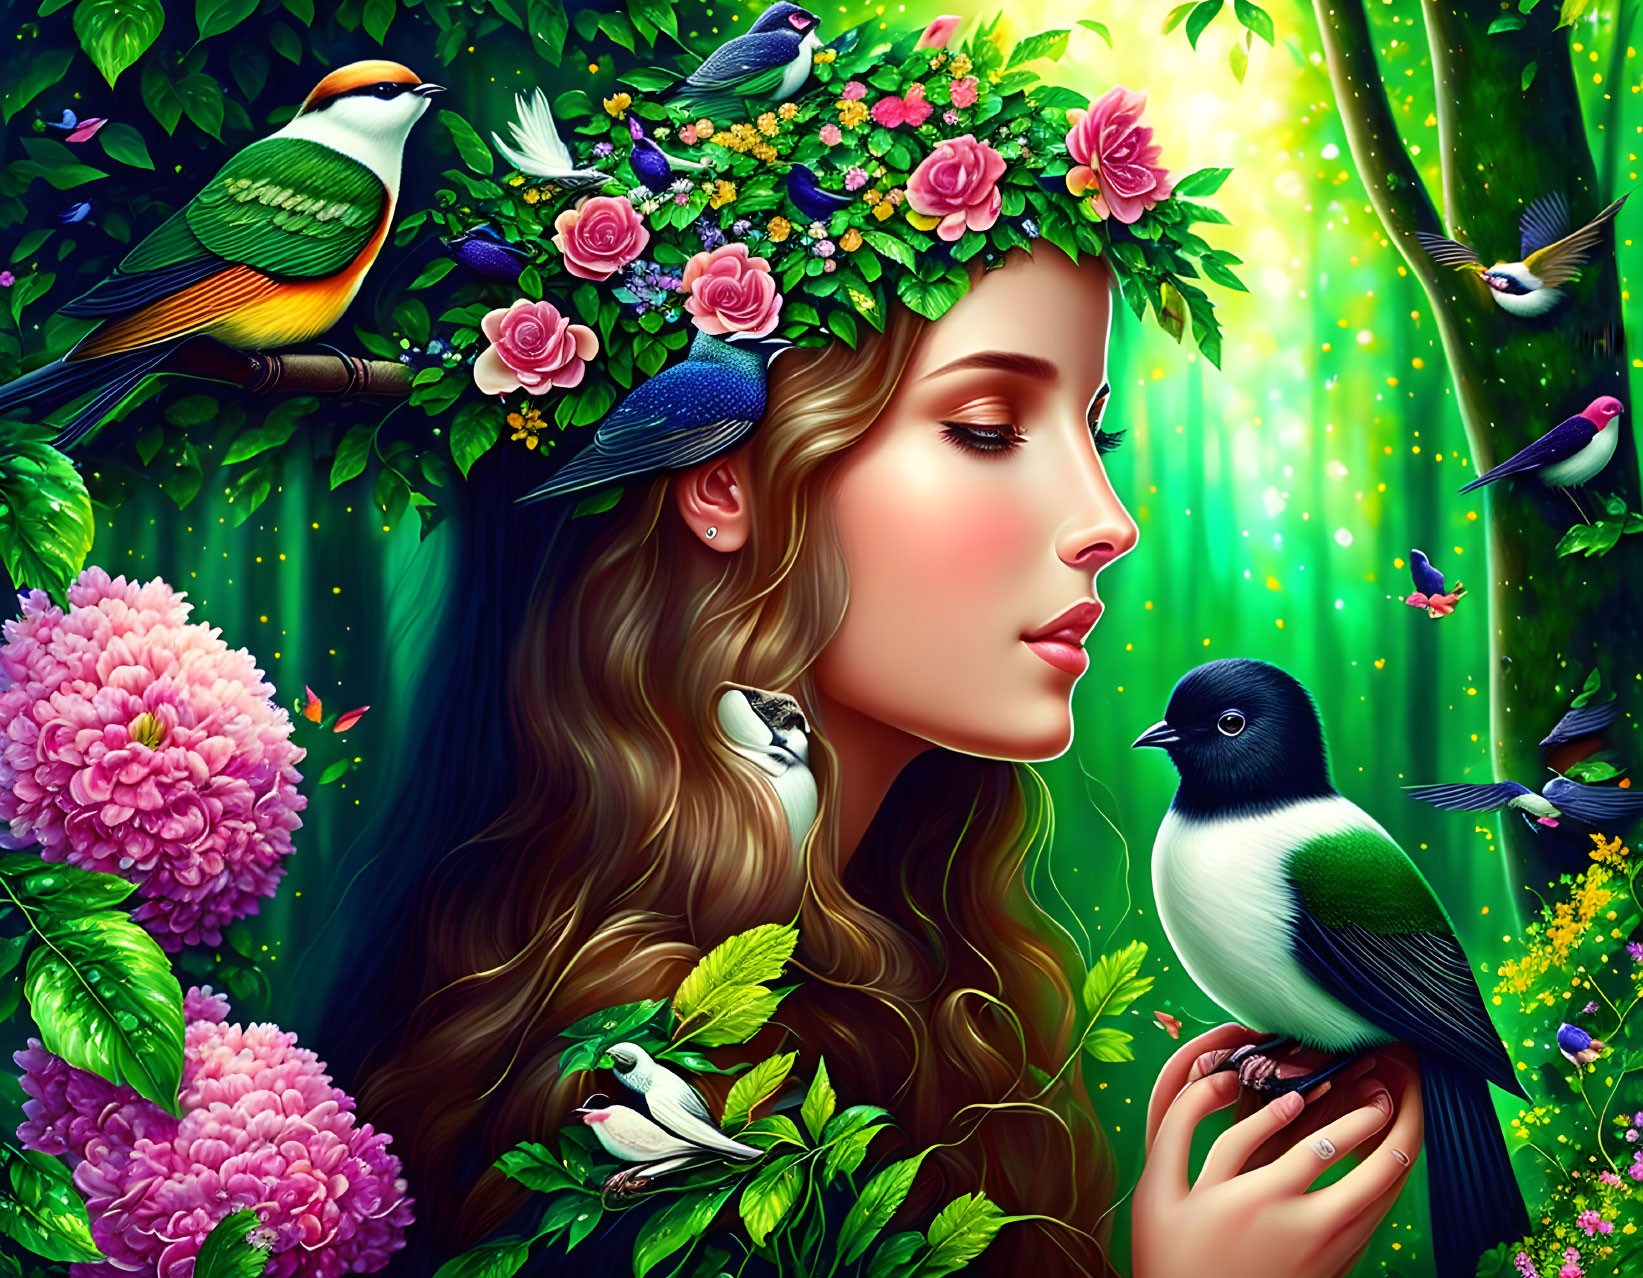 Woman Surrounded by Greenery, Birds, and Flowers